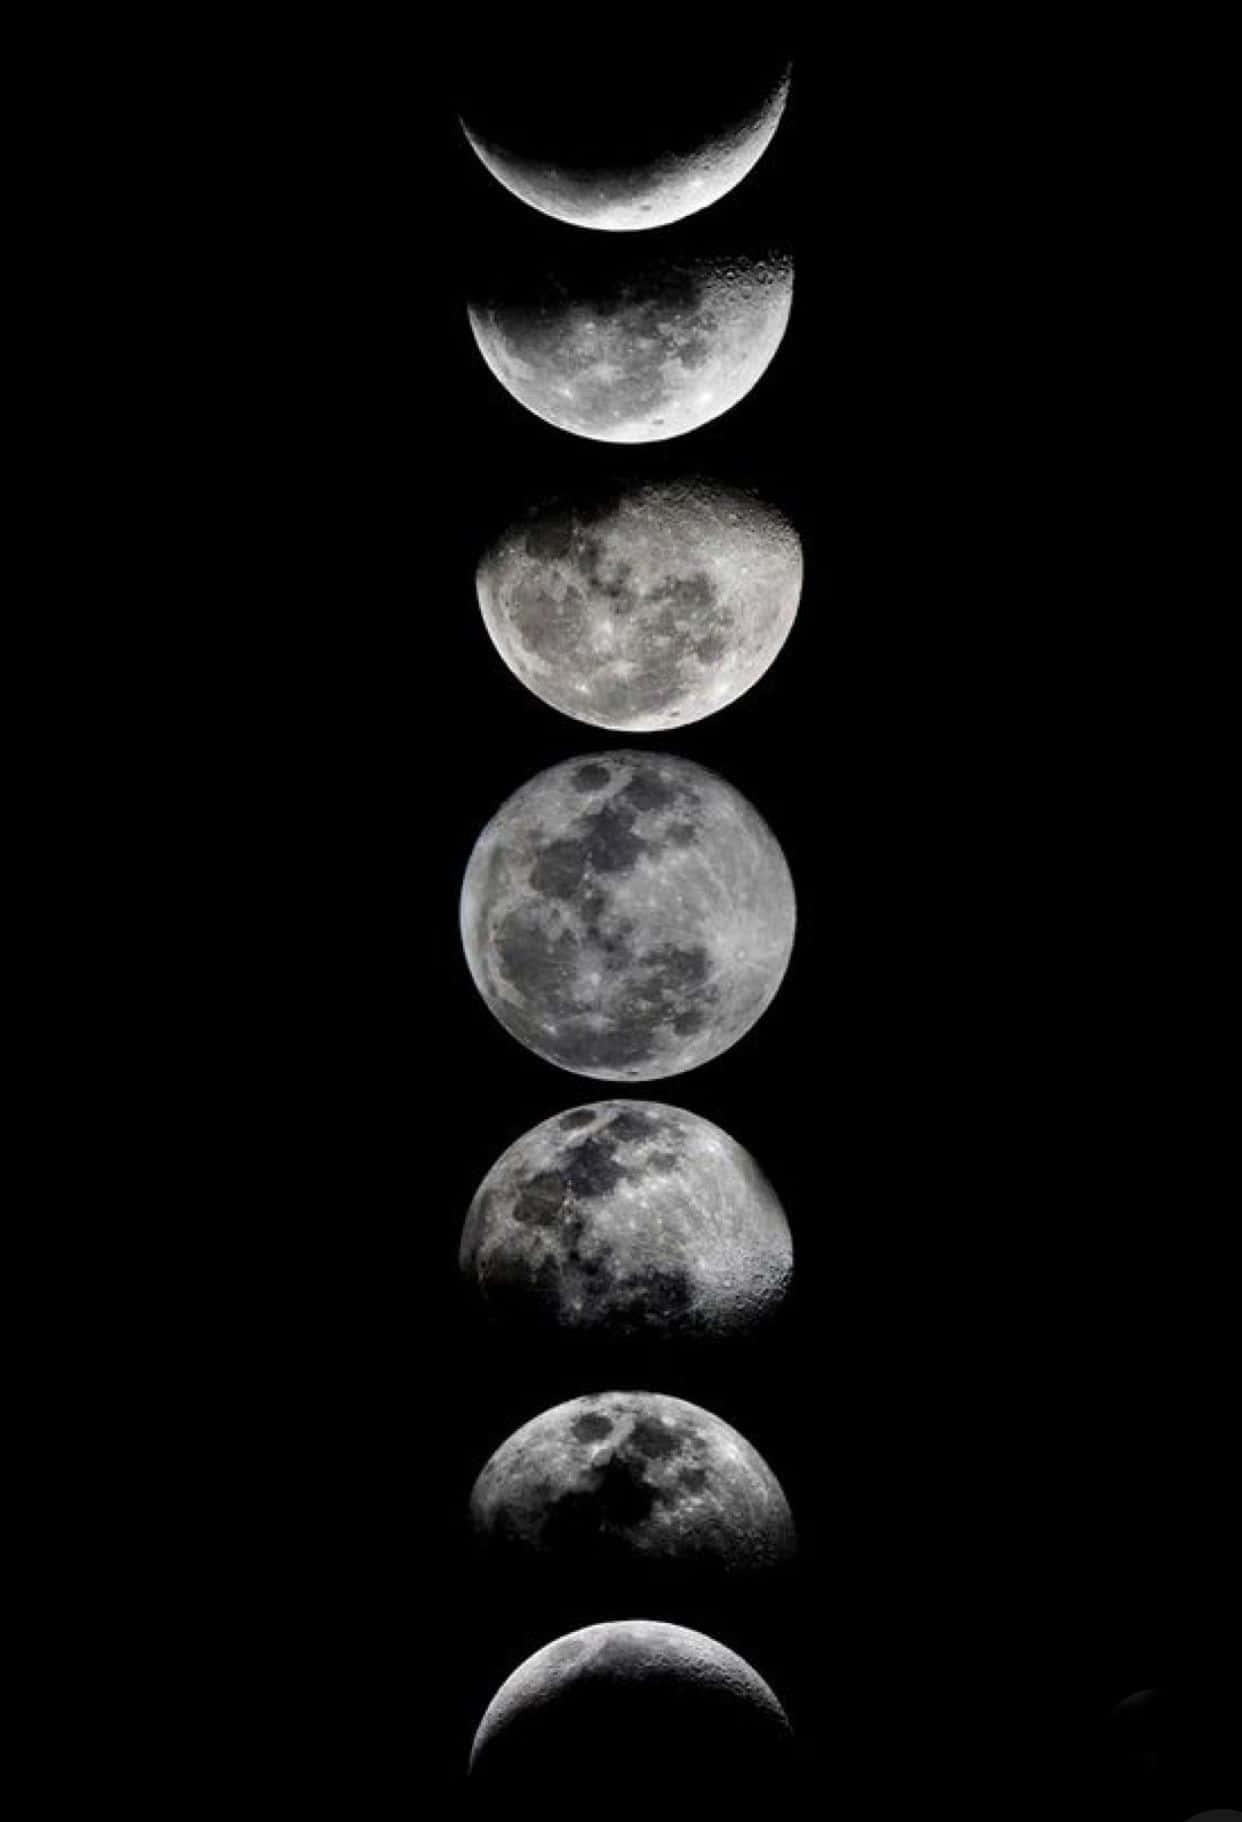 The Moon Phase Iphone Wallpaper